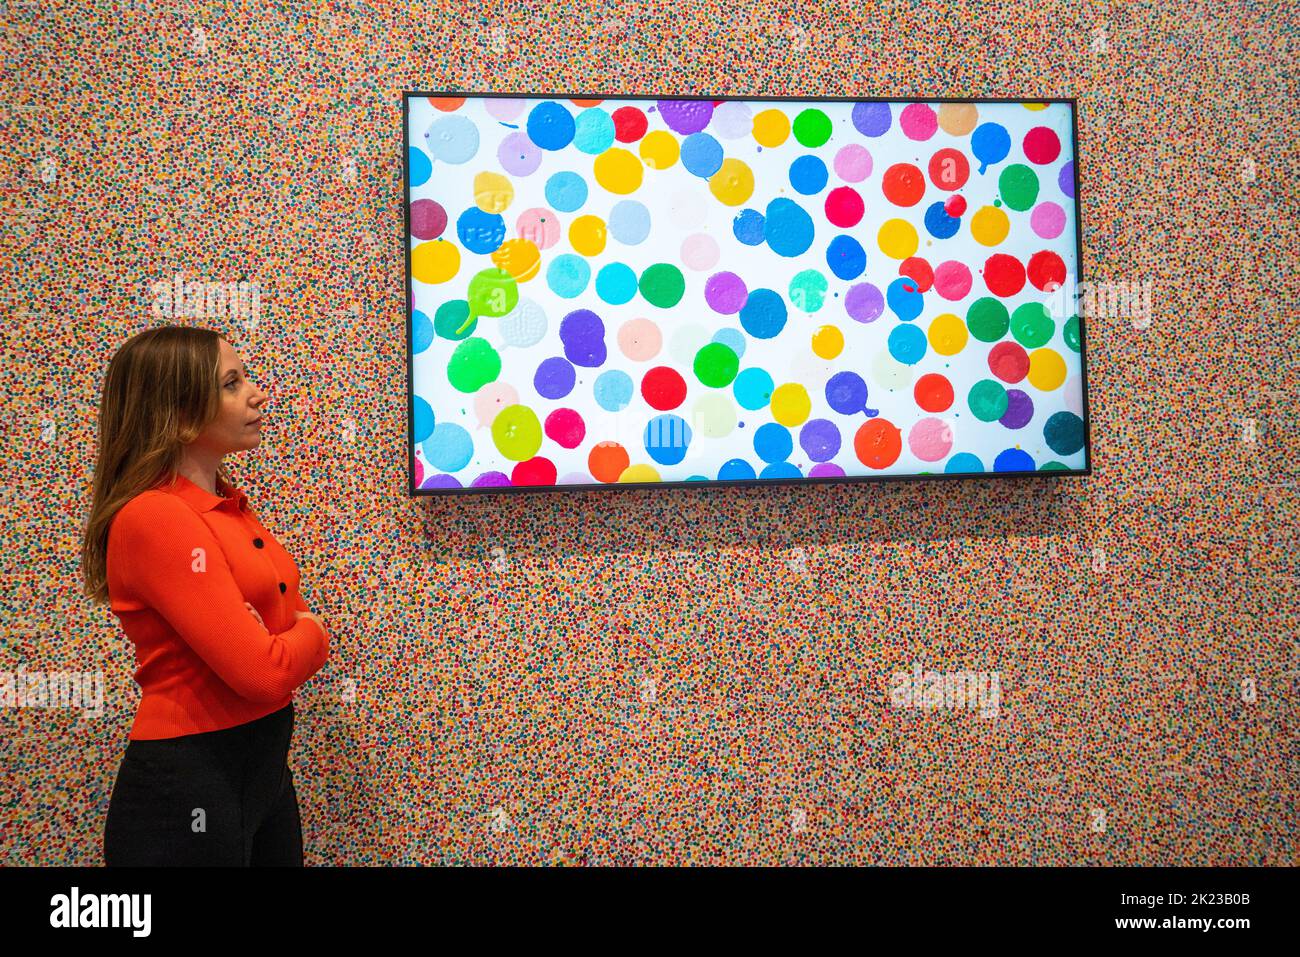 London UK. 22 September 2022.   A Newport staff member views works at the preview of 'The Currency' by Damien Hirst consisting of 10,000 NFTs corresponding to 10,000 unique physical artworks Hirst  created where collectors could keep the NFT or exchange it for the physical artwork. The exhibition runs from 23 September-30 October at Newport Street Gallery Lambeth and  artworks will be burned when the exhibition closes. Credit: amer ghazzal/Alamy Live News. Stock Photo